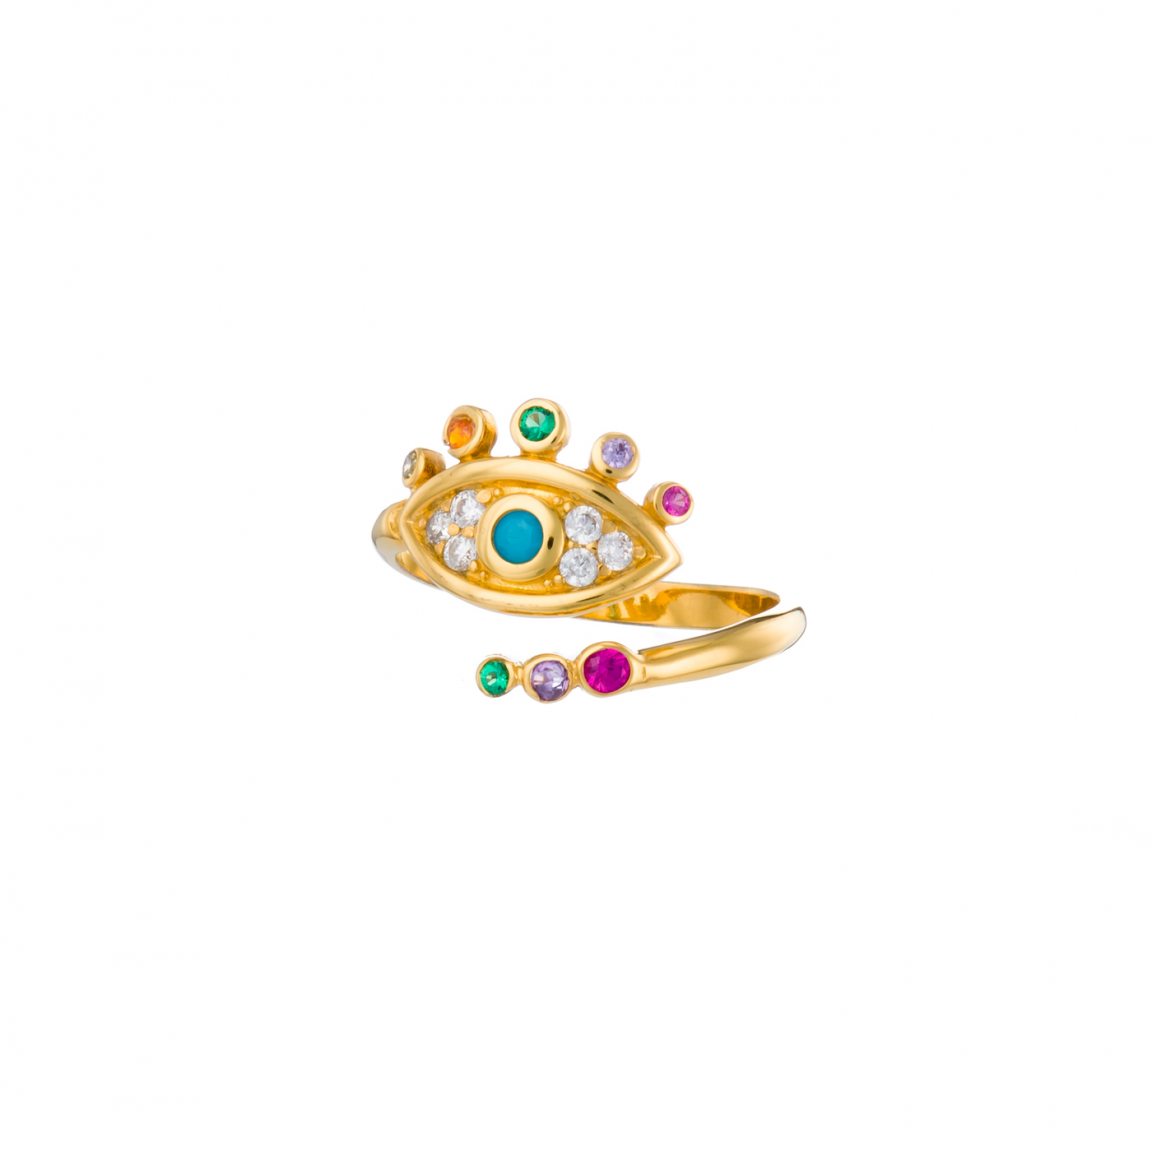 Gold plated ring with eye